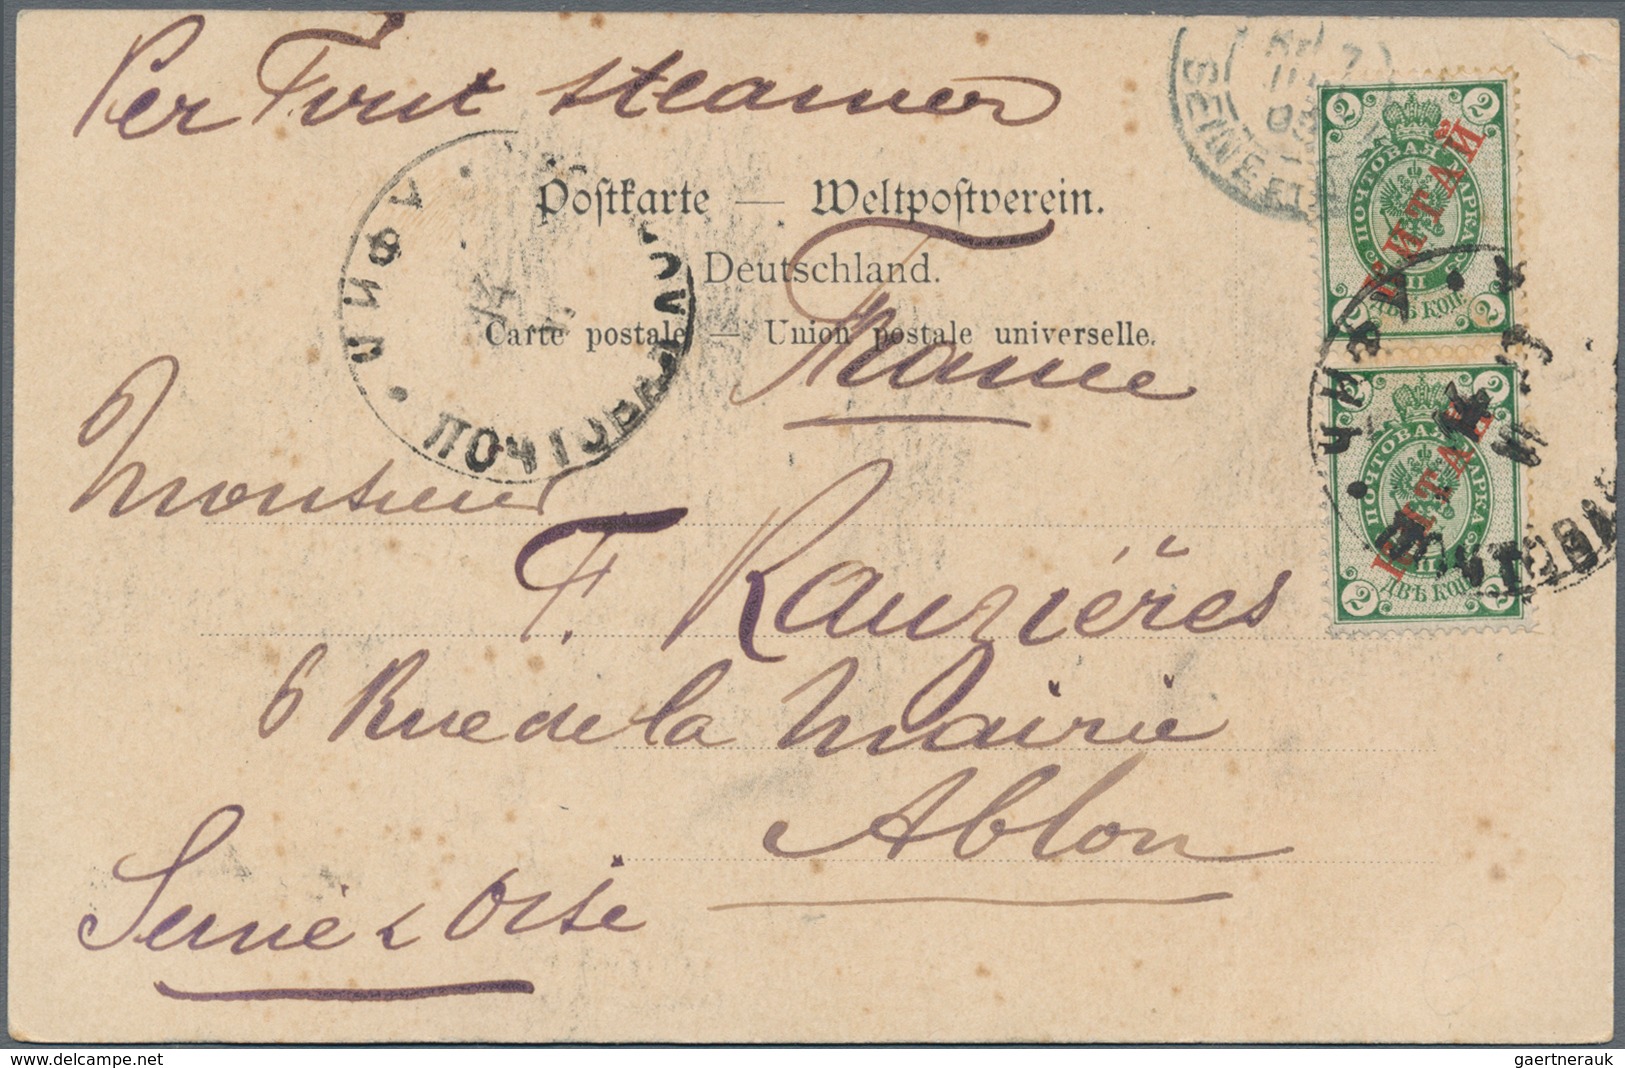 Russische Post In China: 1898/1910, 2 K. Pair Canc.large Type "INKOU 14 VI 1903" To Ppc (Chefoo. Hos - China